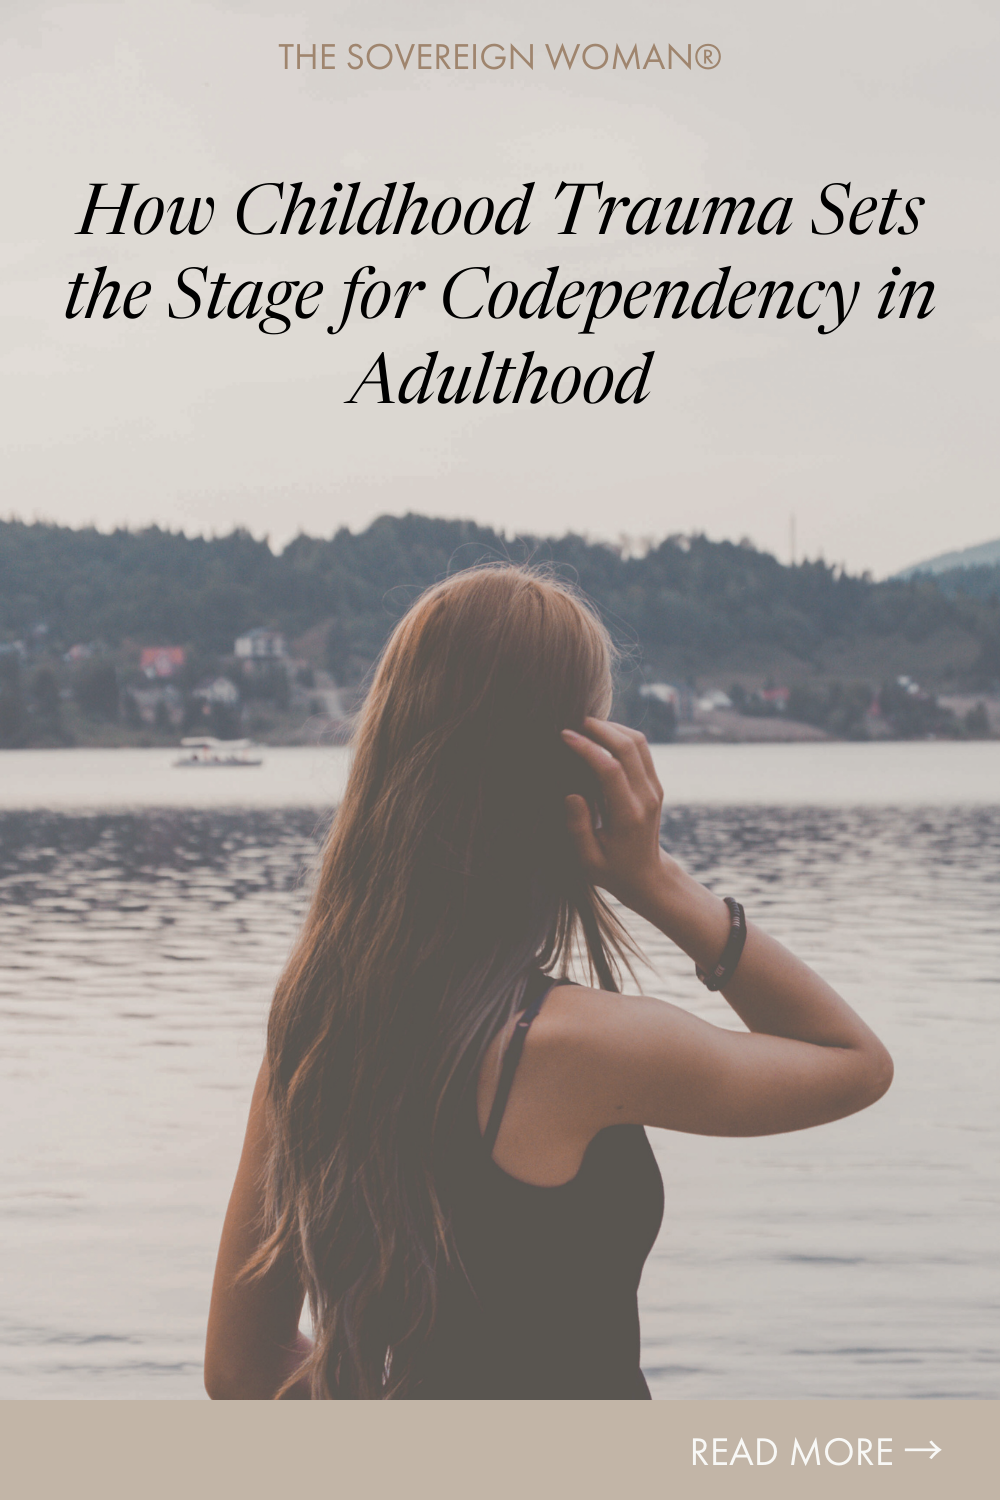 How Childhood Trauma Sets the Stage for Codependency in Adulthood